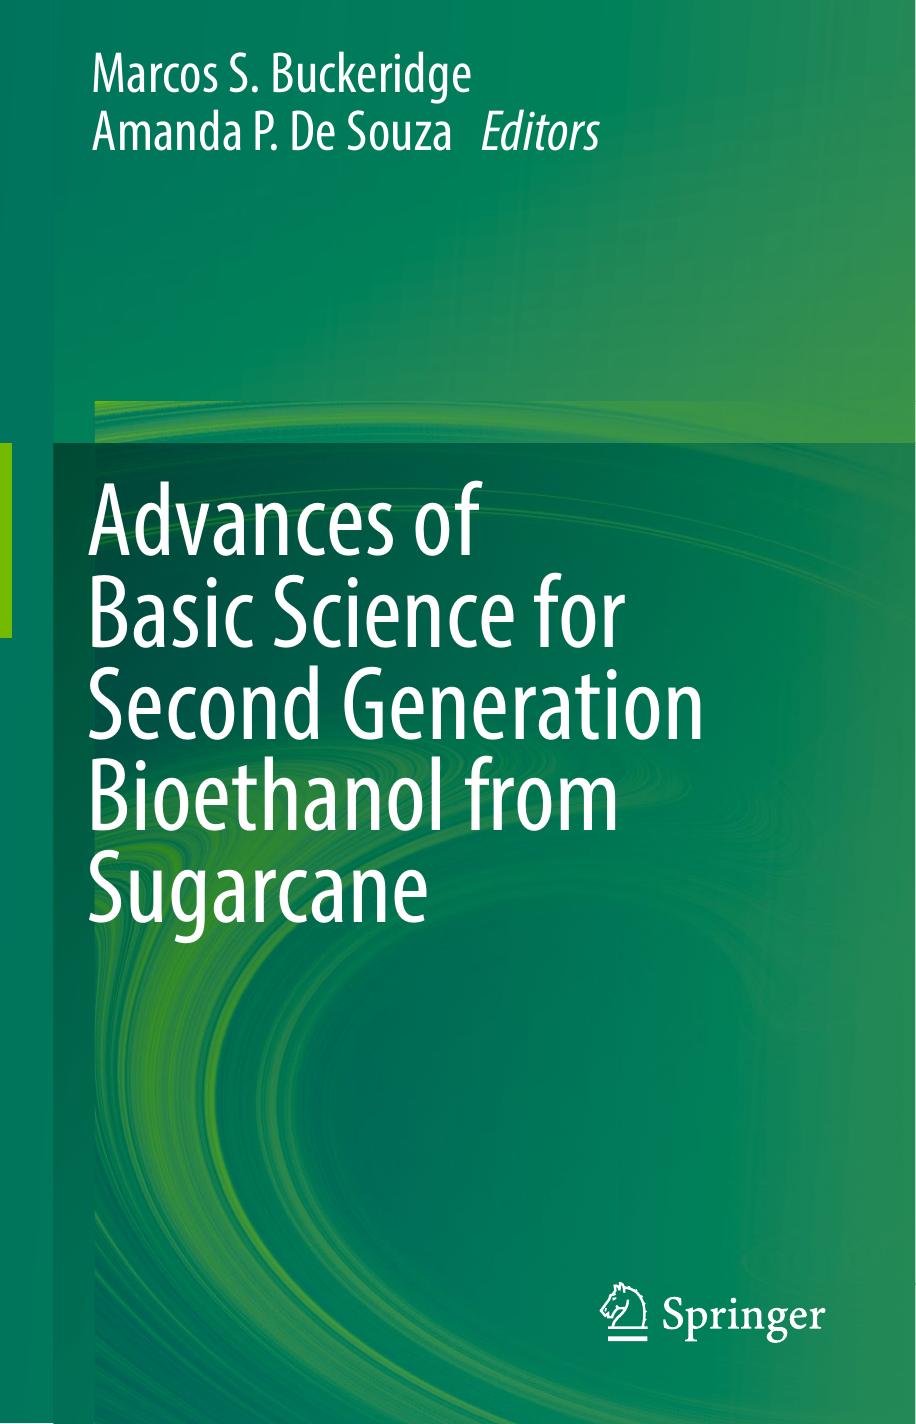 Advances of Basic Science for Second Generation Bioethanol from Sugarcane 2017